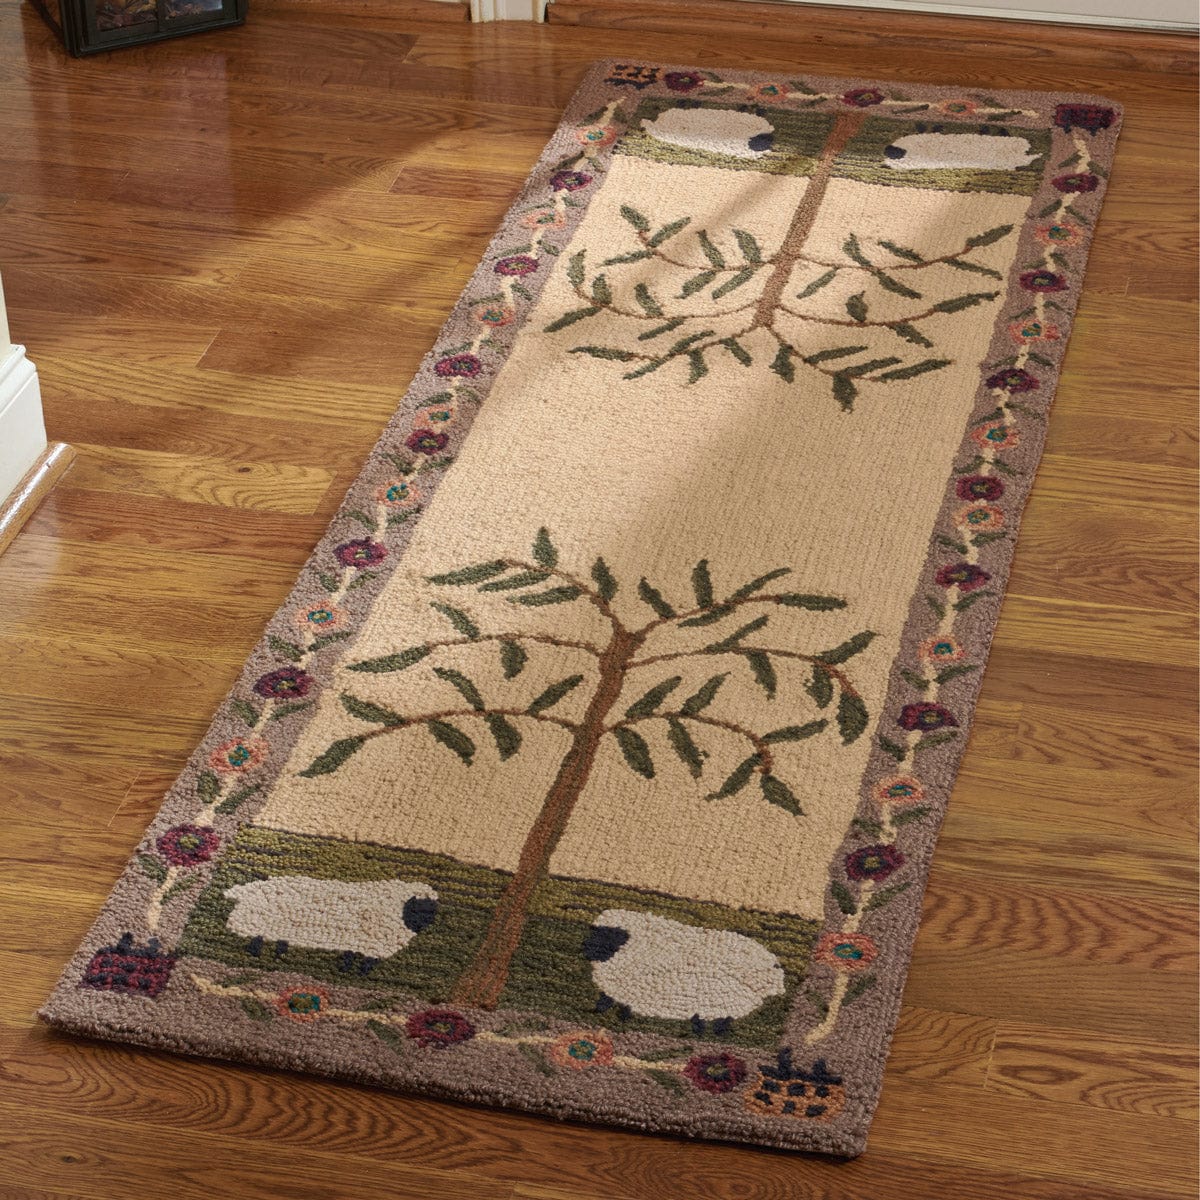 Willow &amp; Sheep Hooked Rug 24&quot; x 72&quot; Runner-Park Designs-The Village Merchant